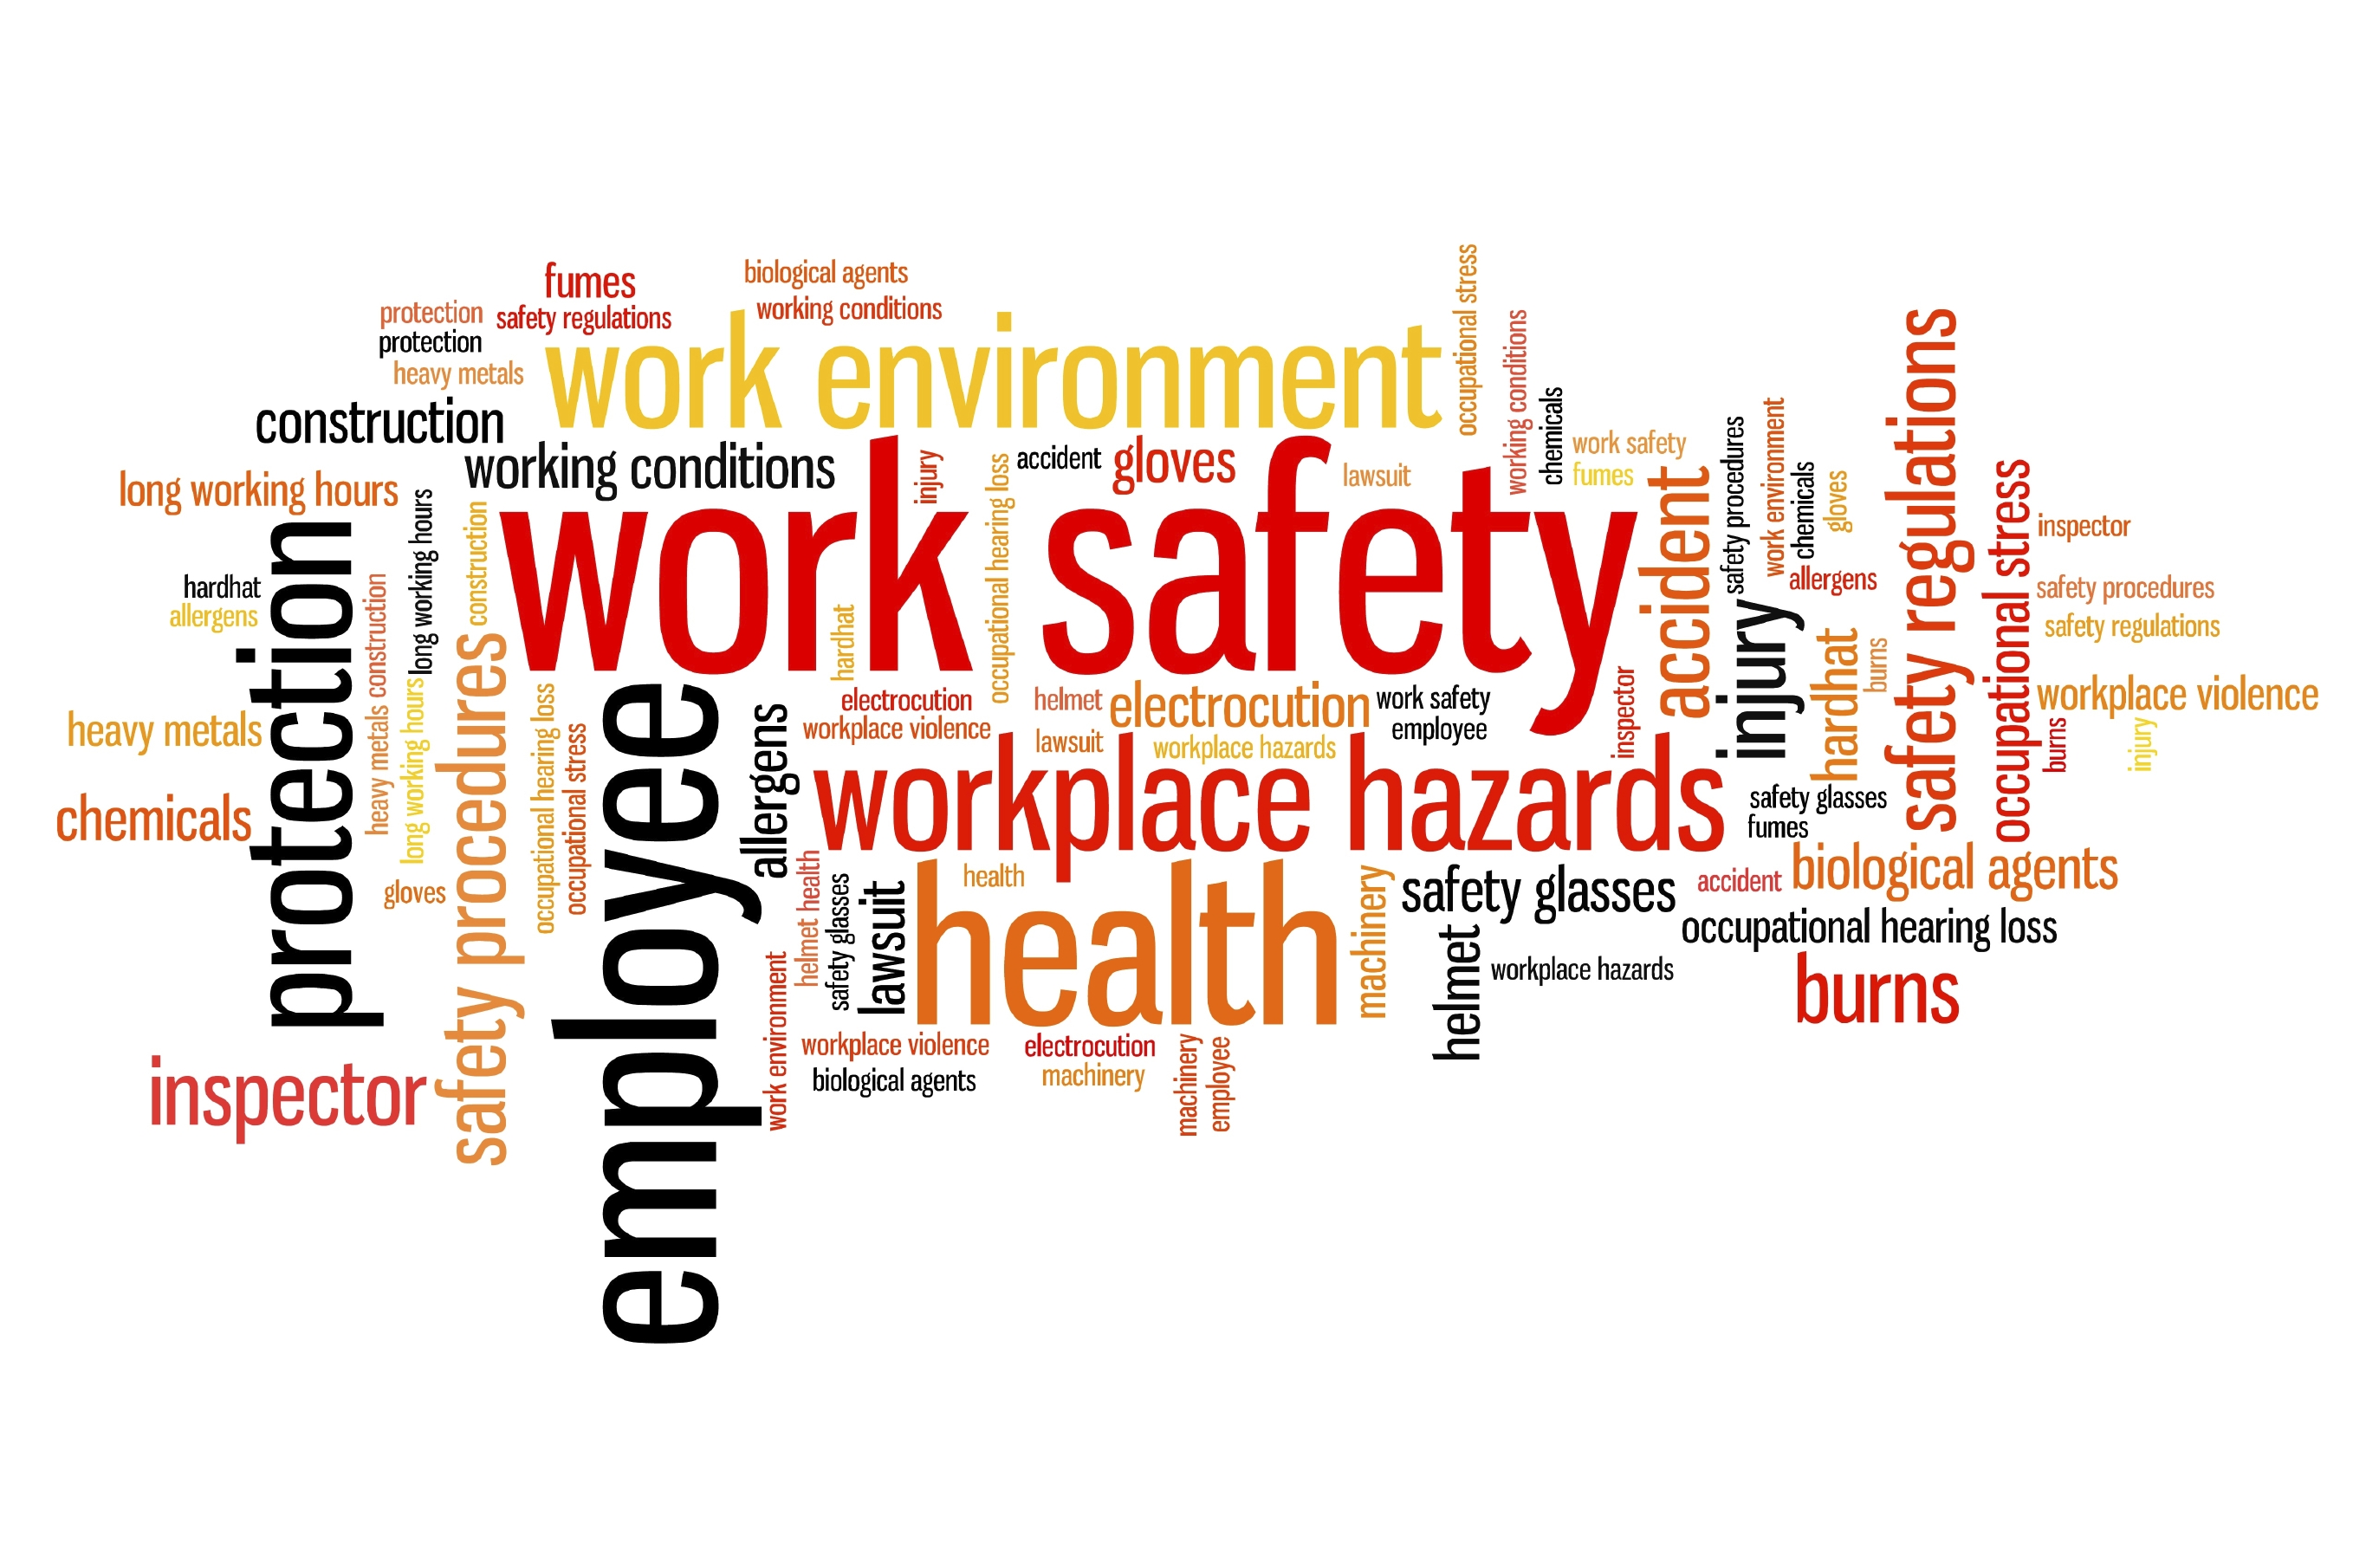 management-of-health-and-safety-at-work-regulations-learnpac-systems